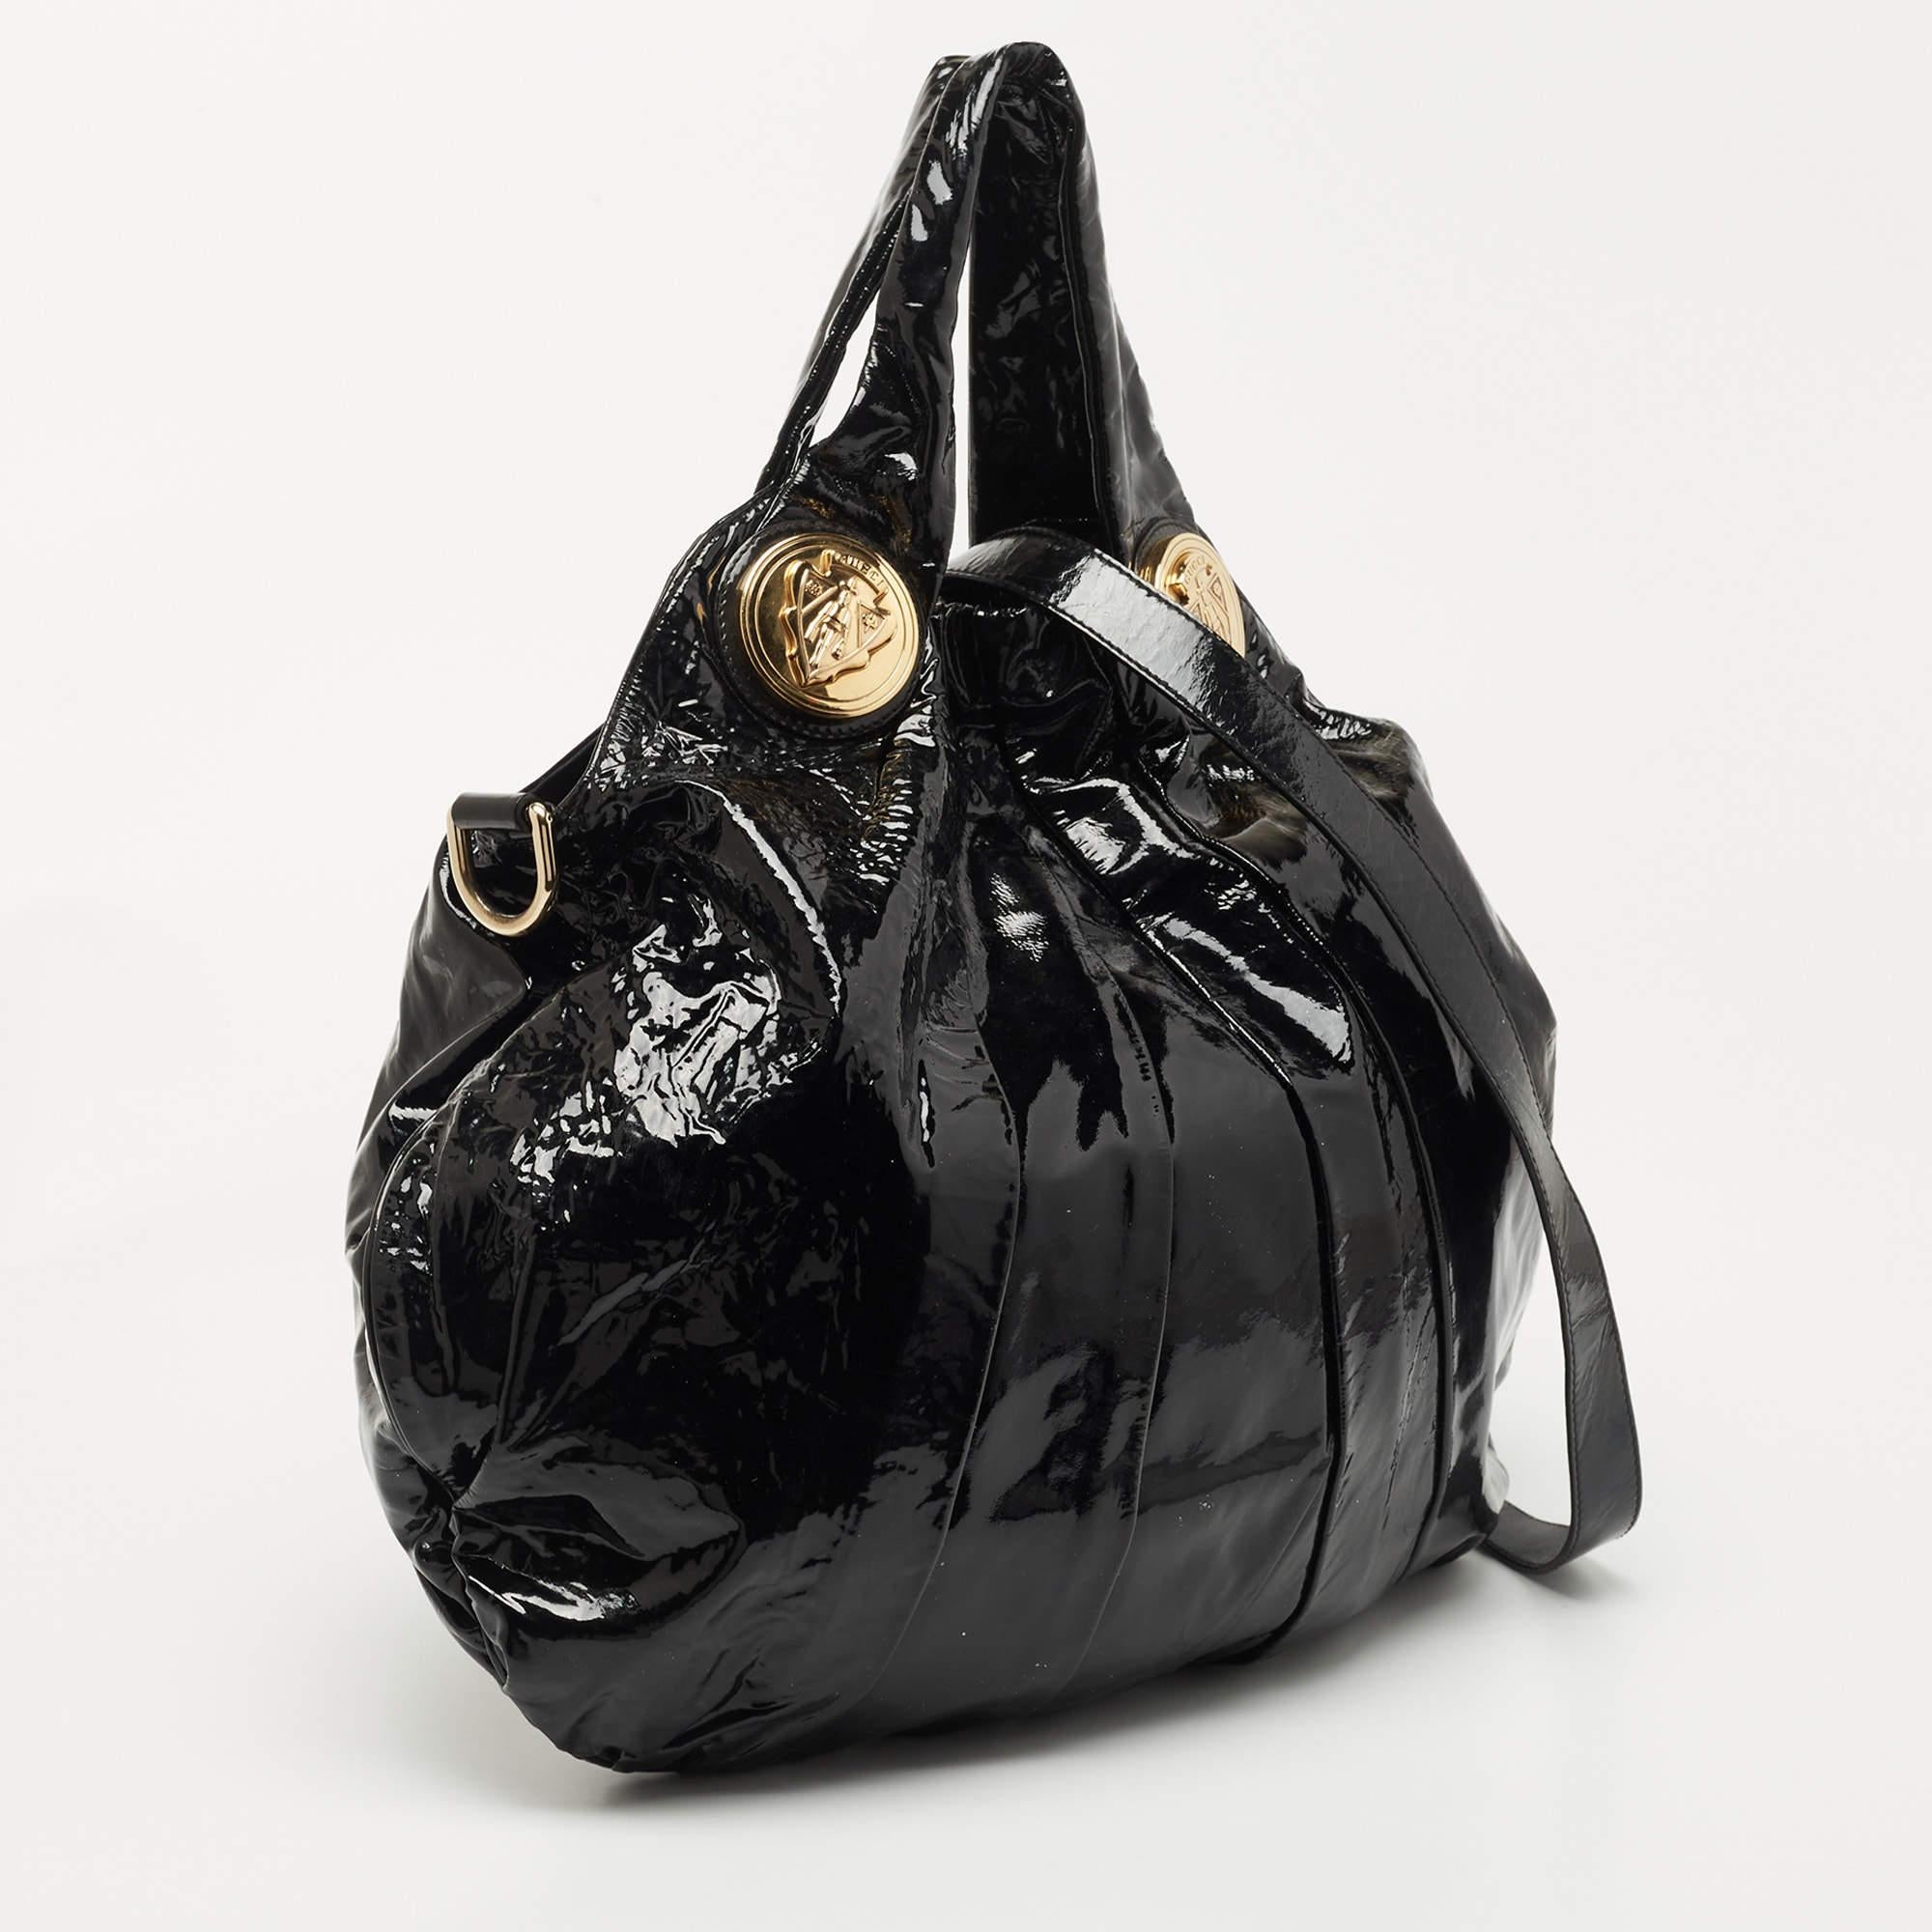 Women's Gucci Black Patent Leather Large Hysteria Hobo